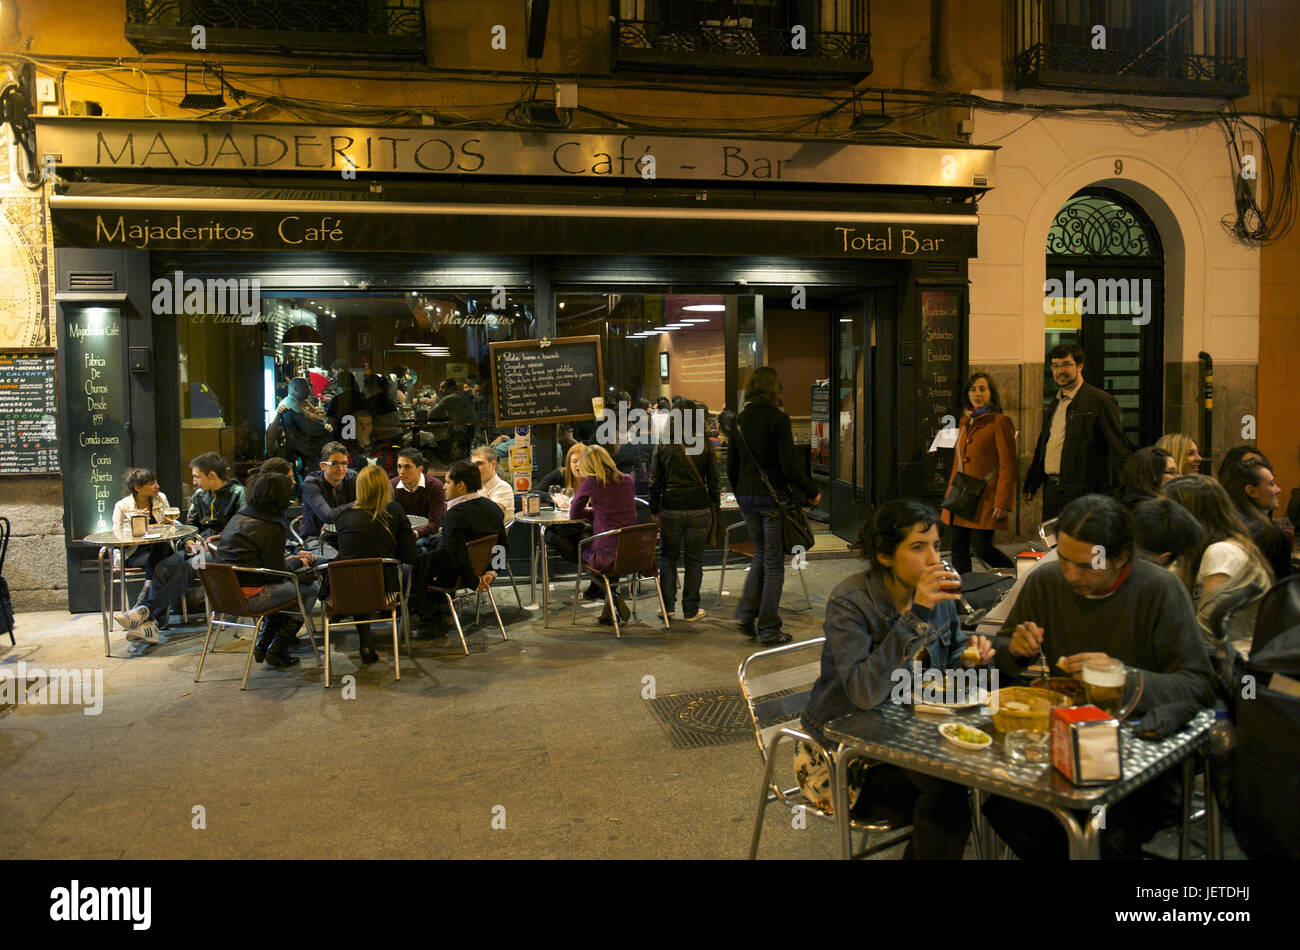 Spain, Madrid, Majaderitos cafe, guests at night on the street, Stock Photo